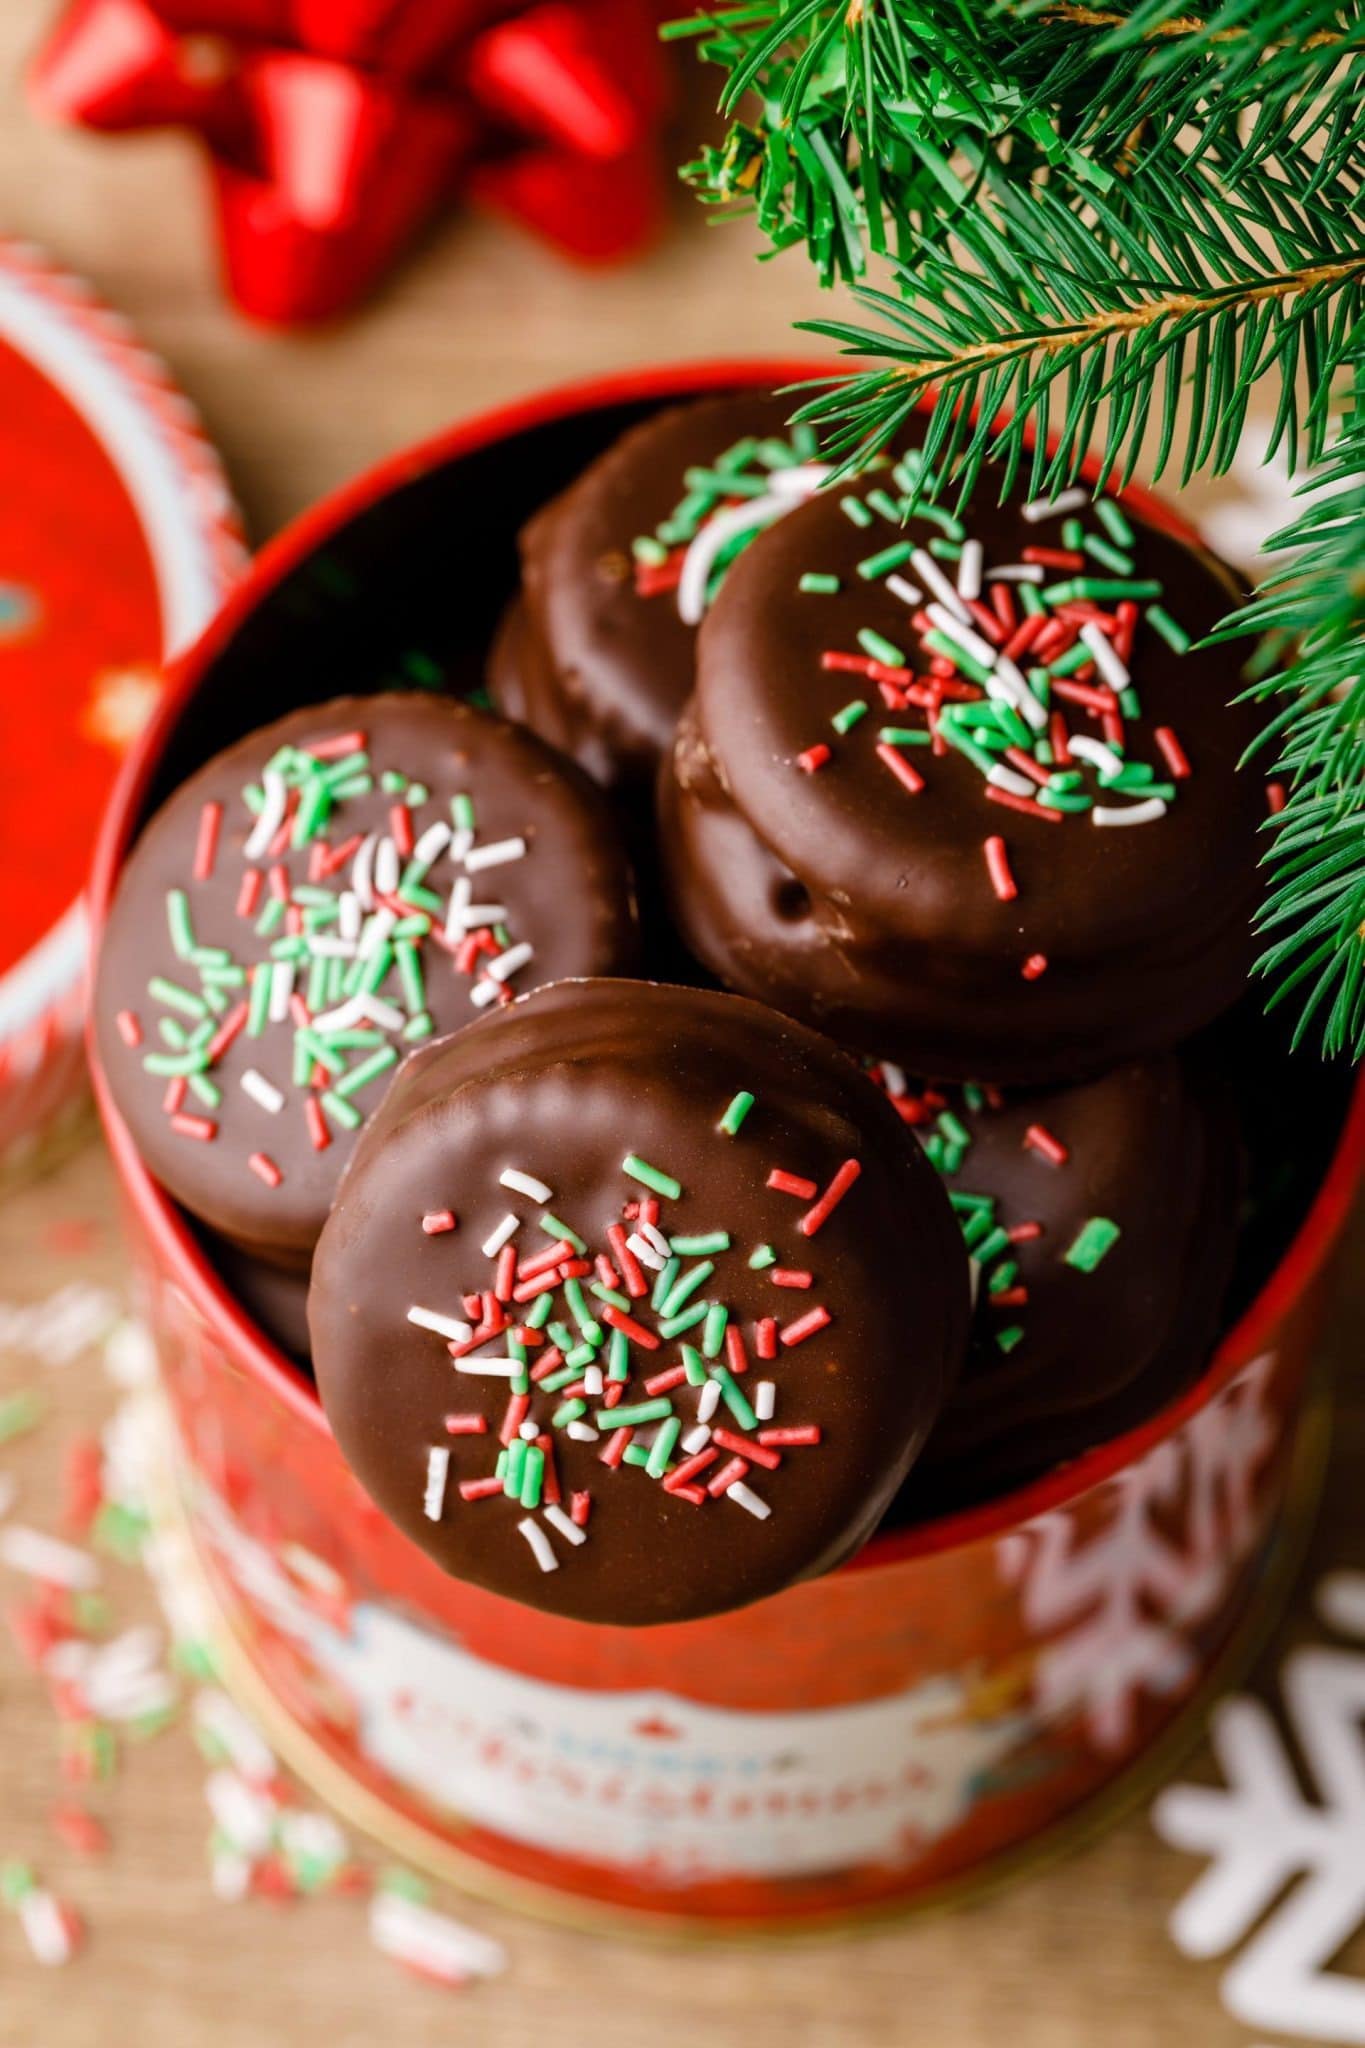 Chocolate coated crackers with sprinkles on top placed on a holiday can.